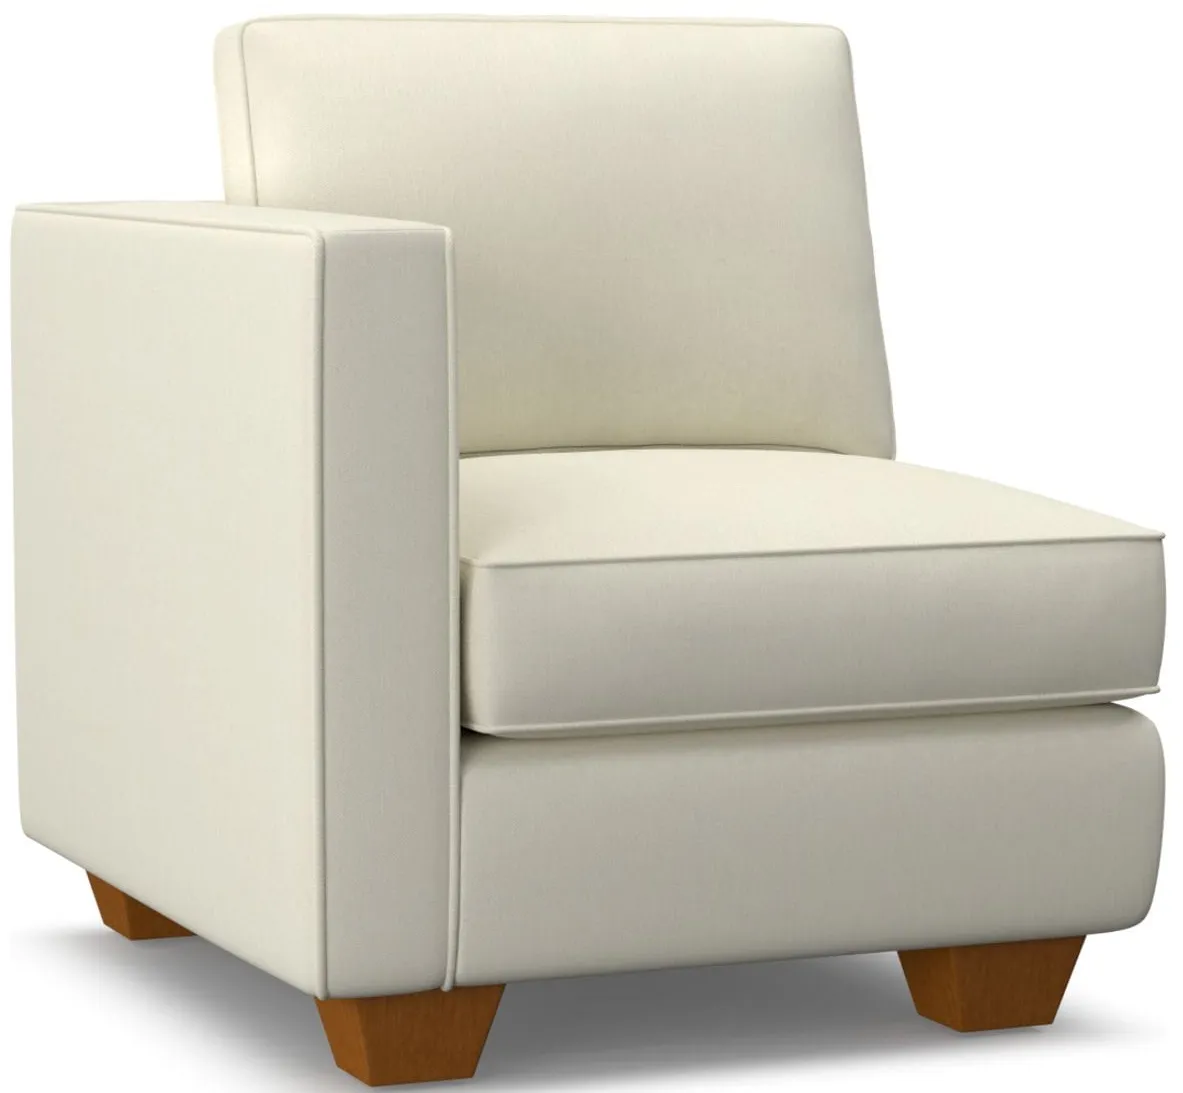 Catalina Left Arm Chair